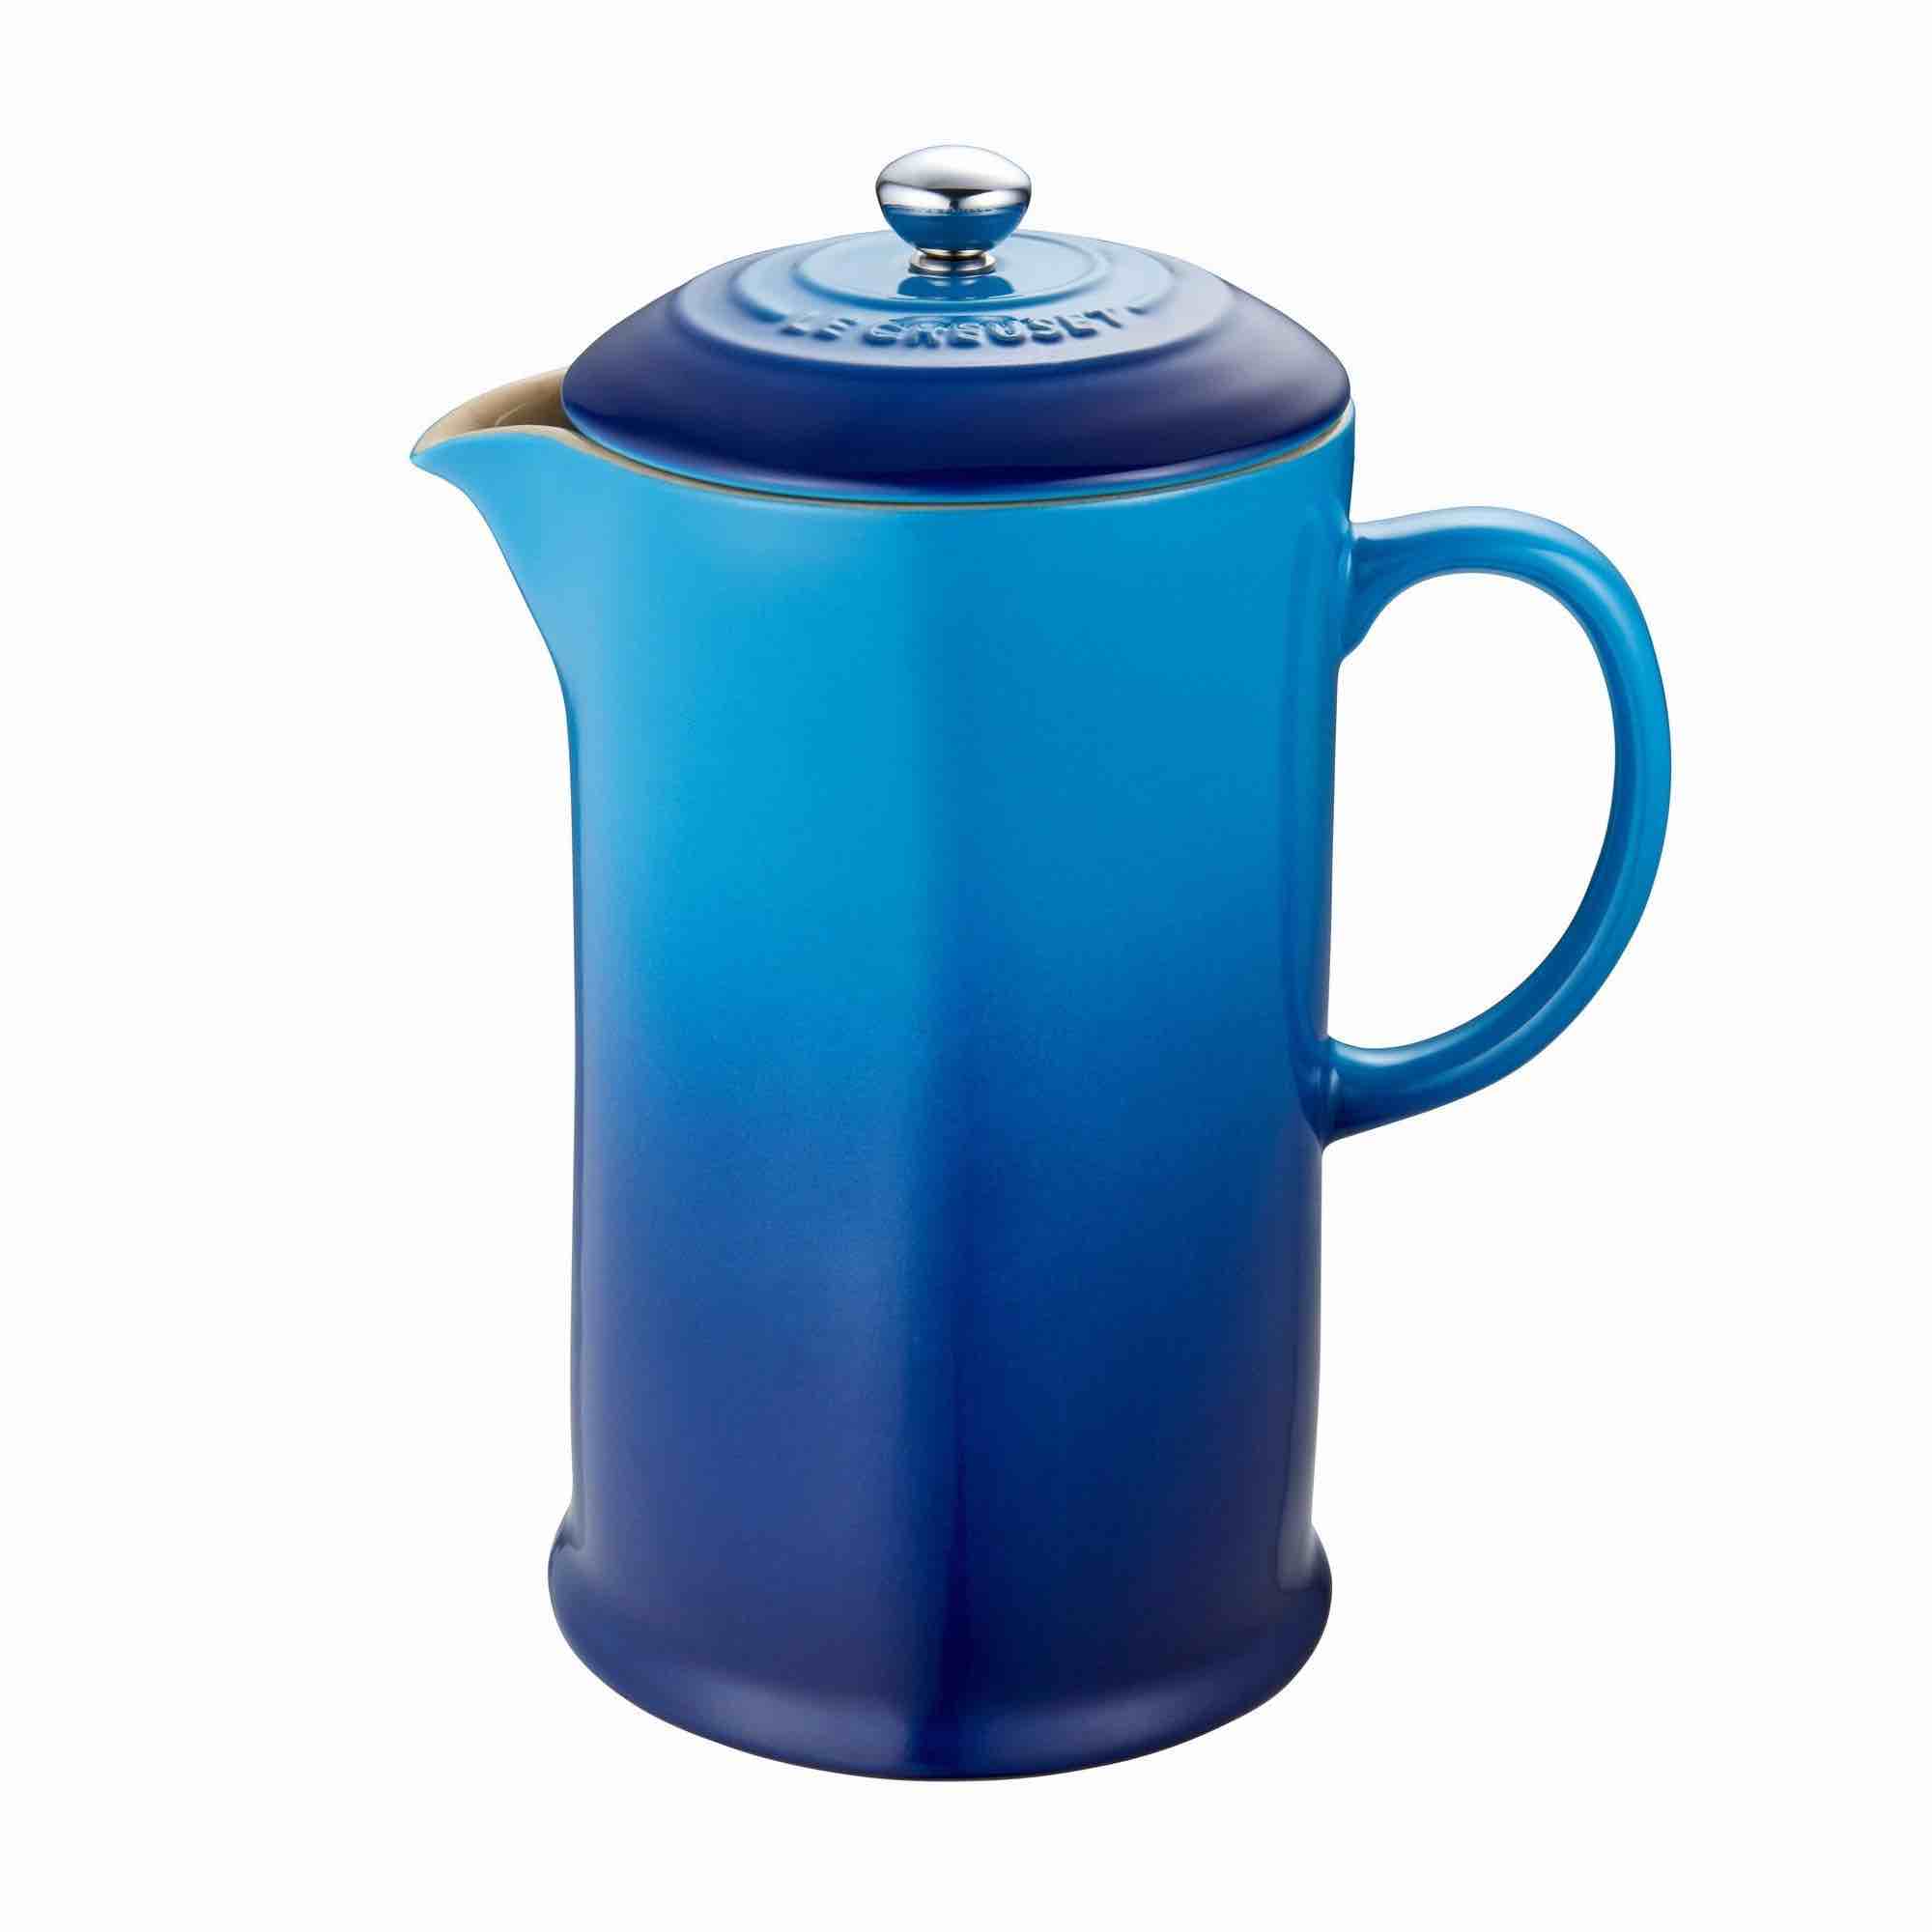 Le Creuset French Press | Blueberry